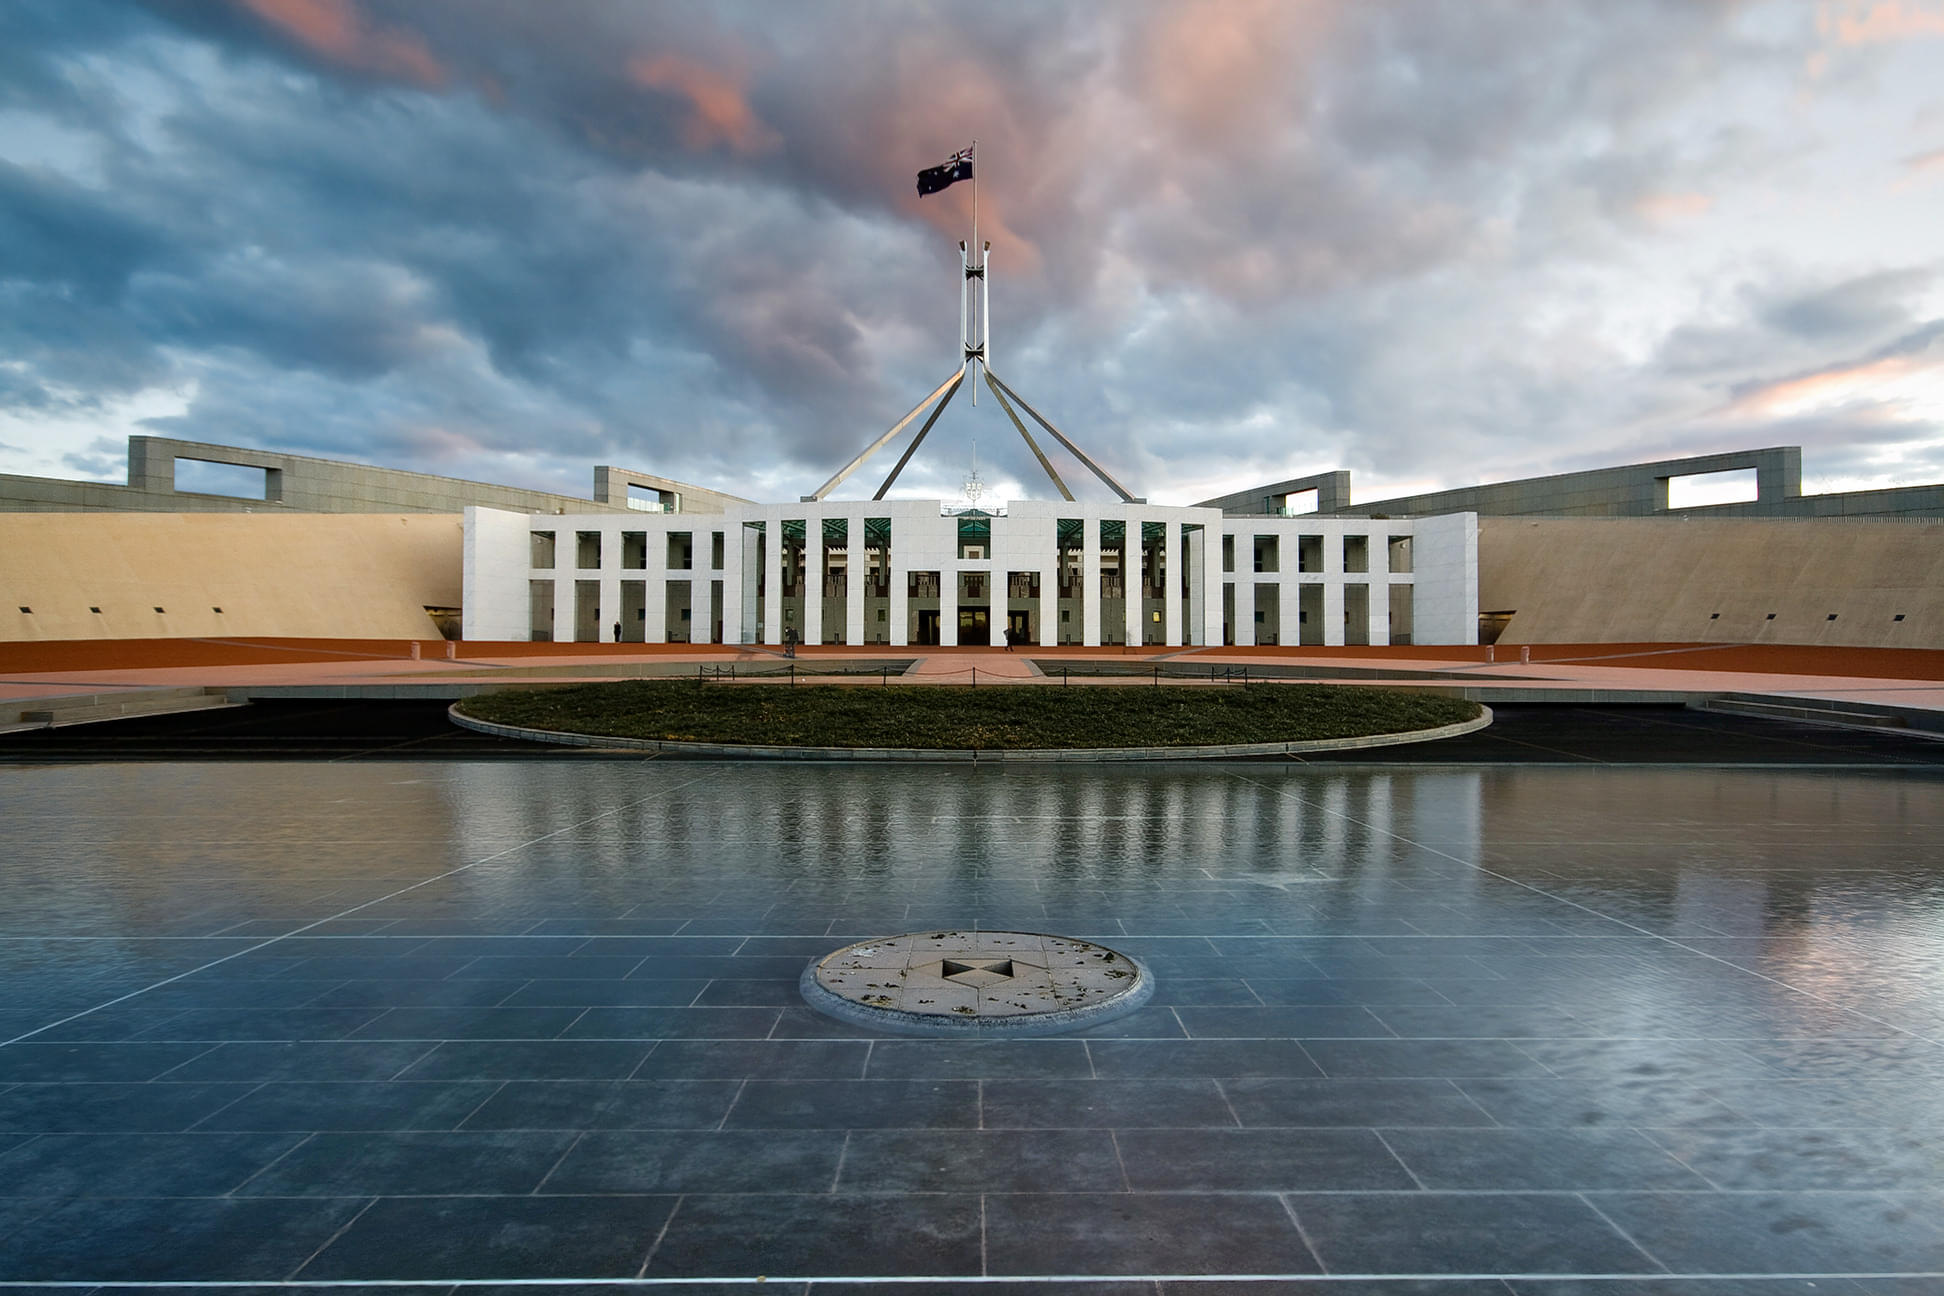 The Parliament House Overview